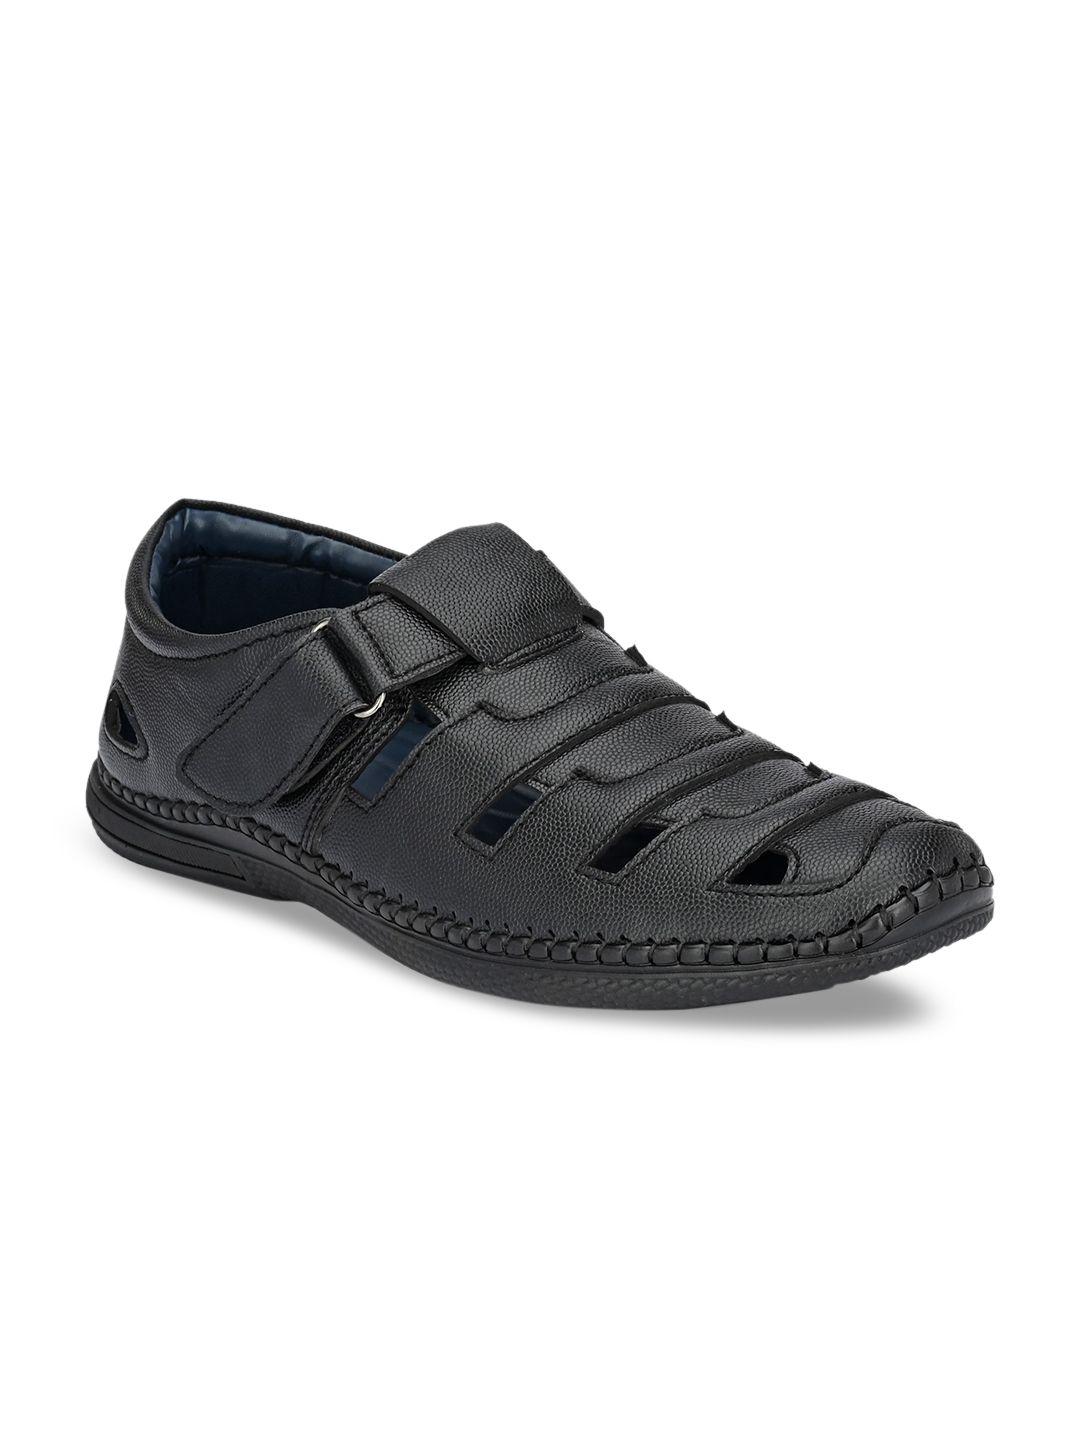 the roadster lifestyle co men black textured shoe-style sandals